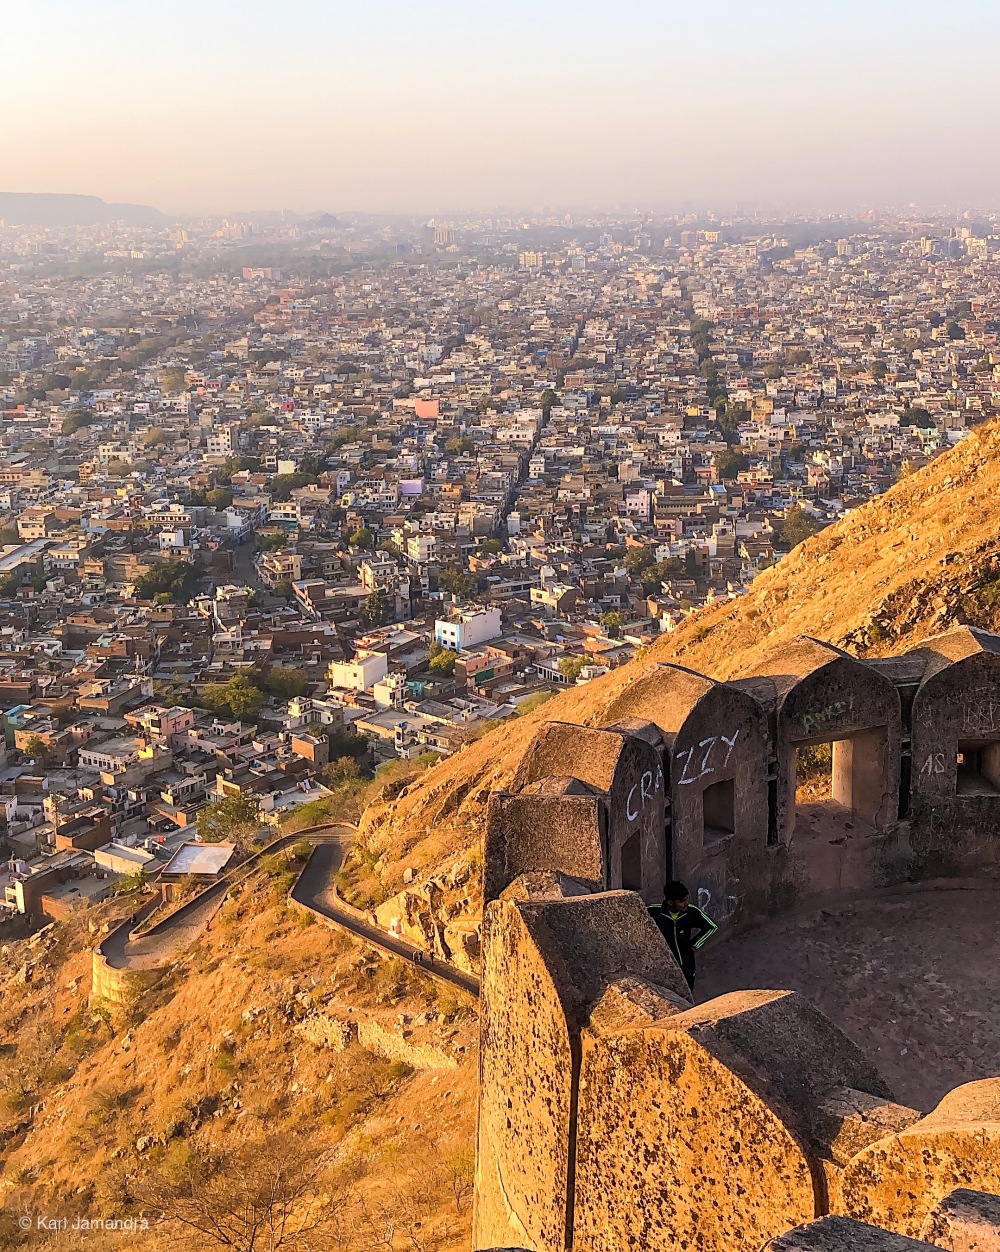 OVERLOOKING THE CITY OF JAIPUR